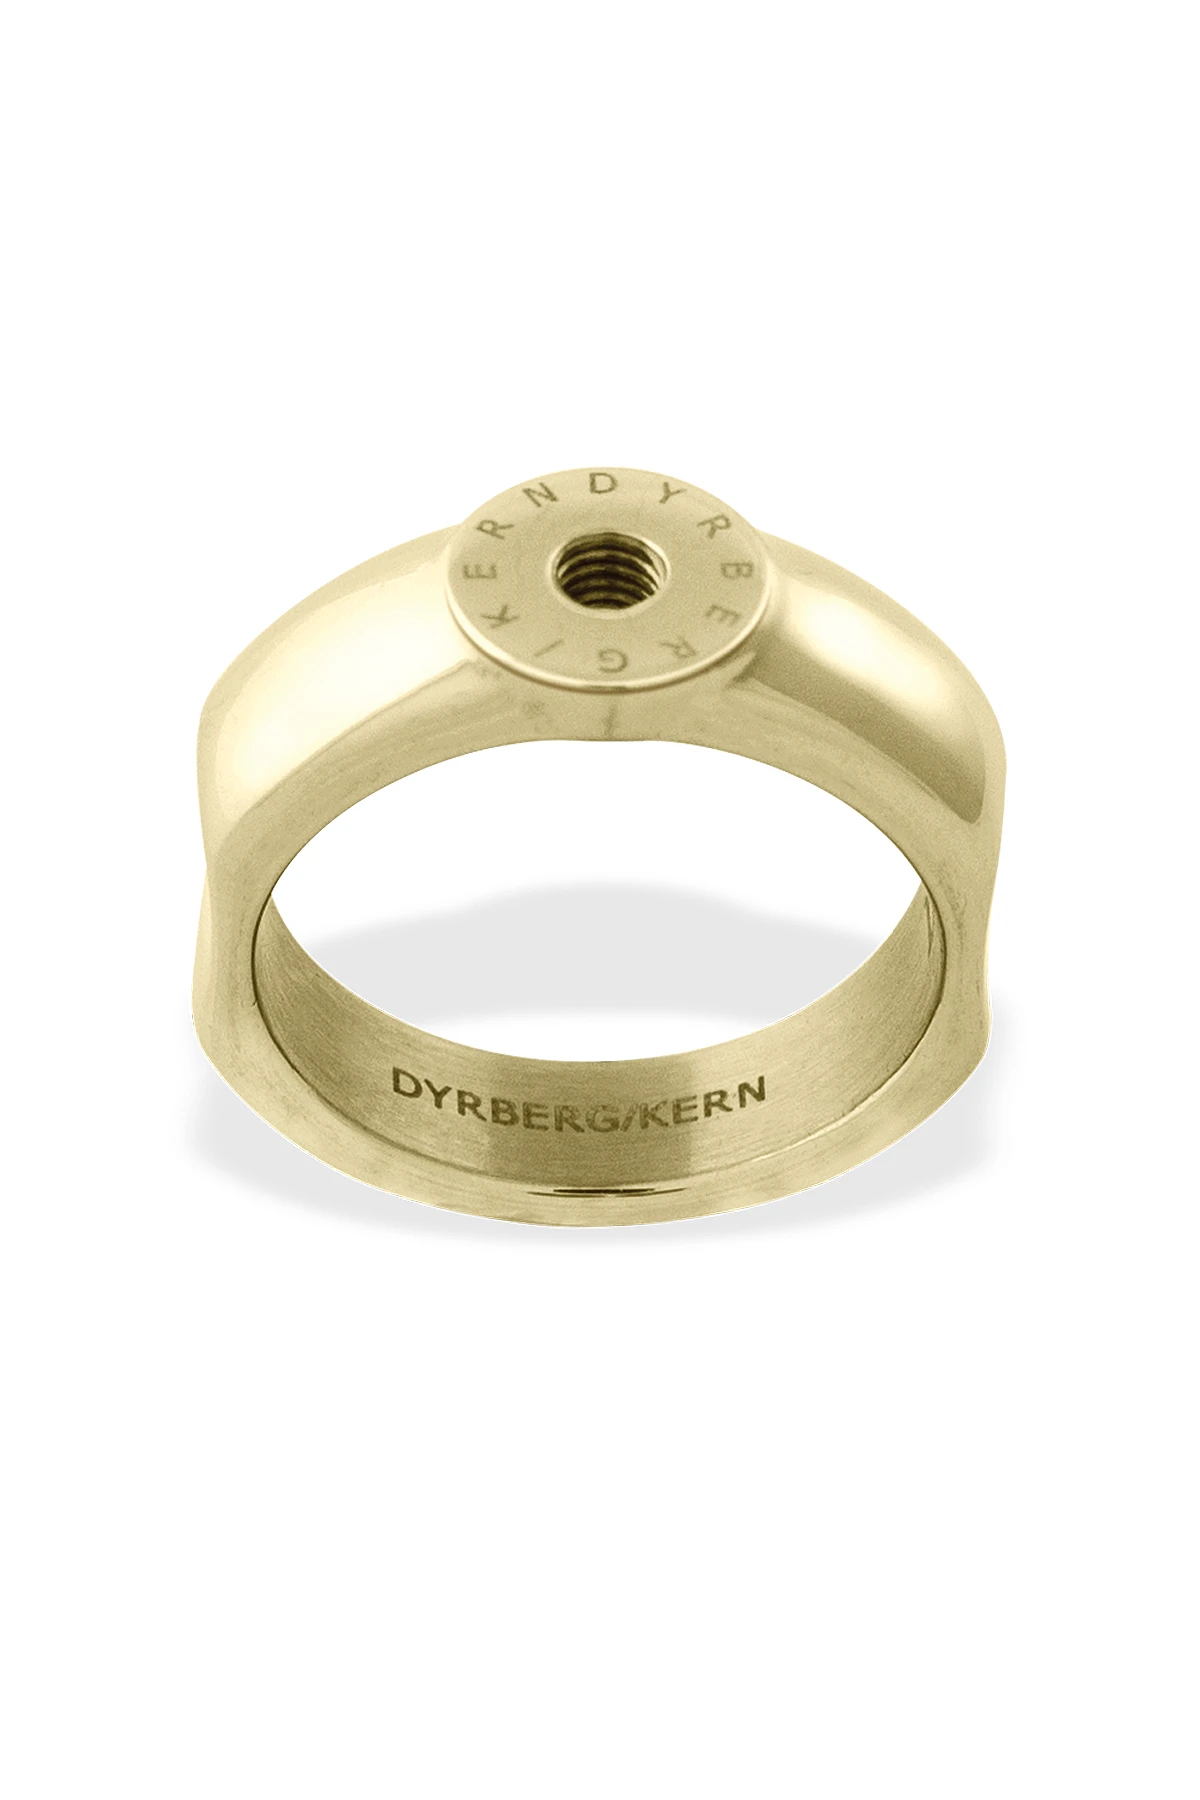 Design Your Own Rings Official - Dyrberg/Kern